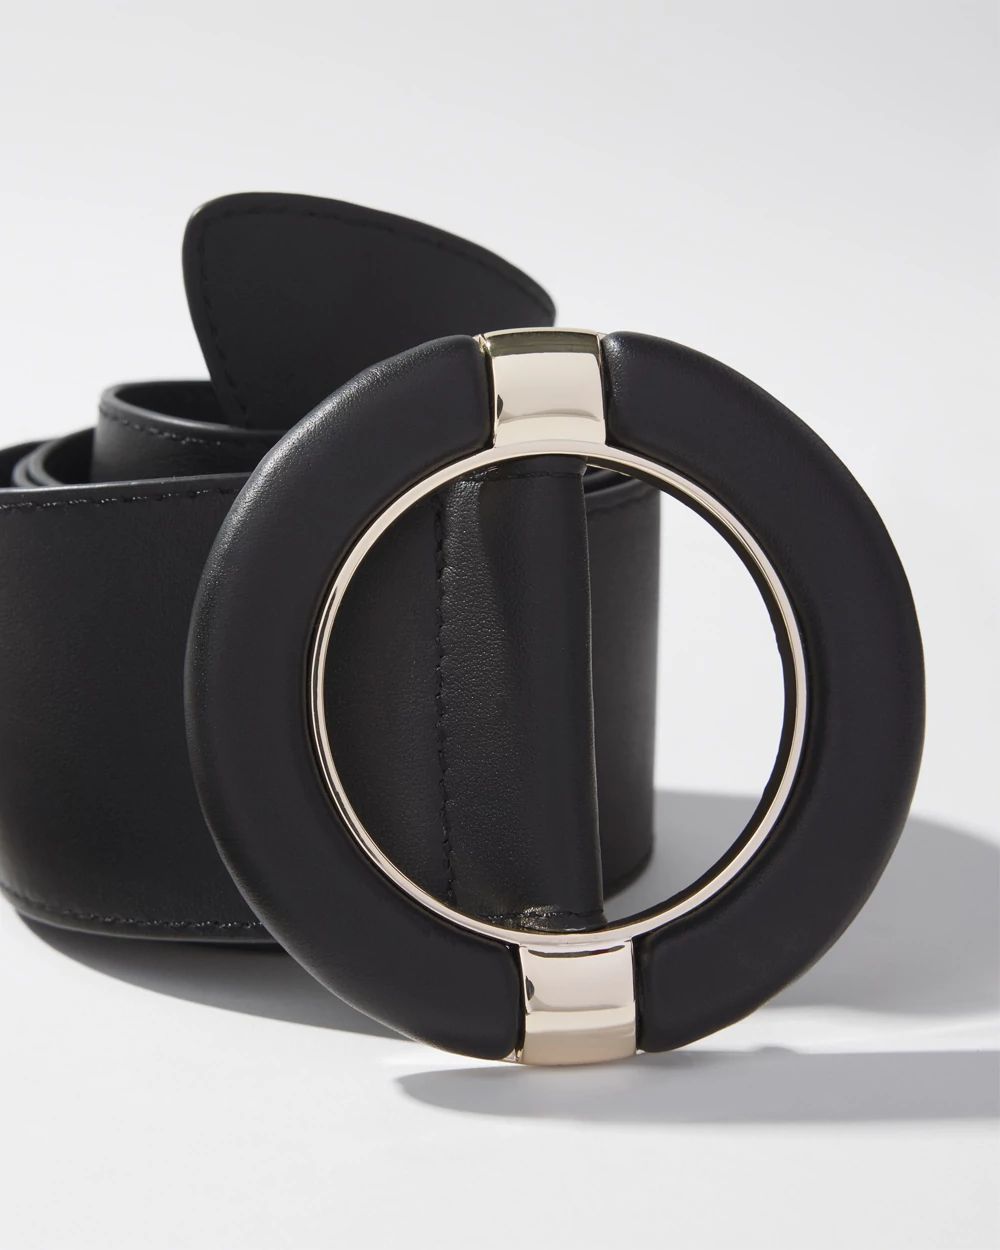 Soft Leather Waist Belt click to view larger image.